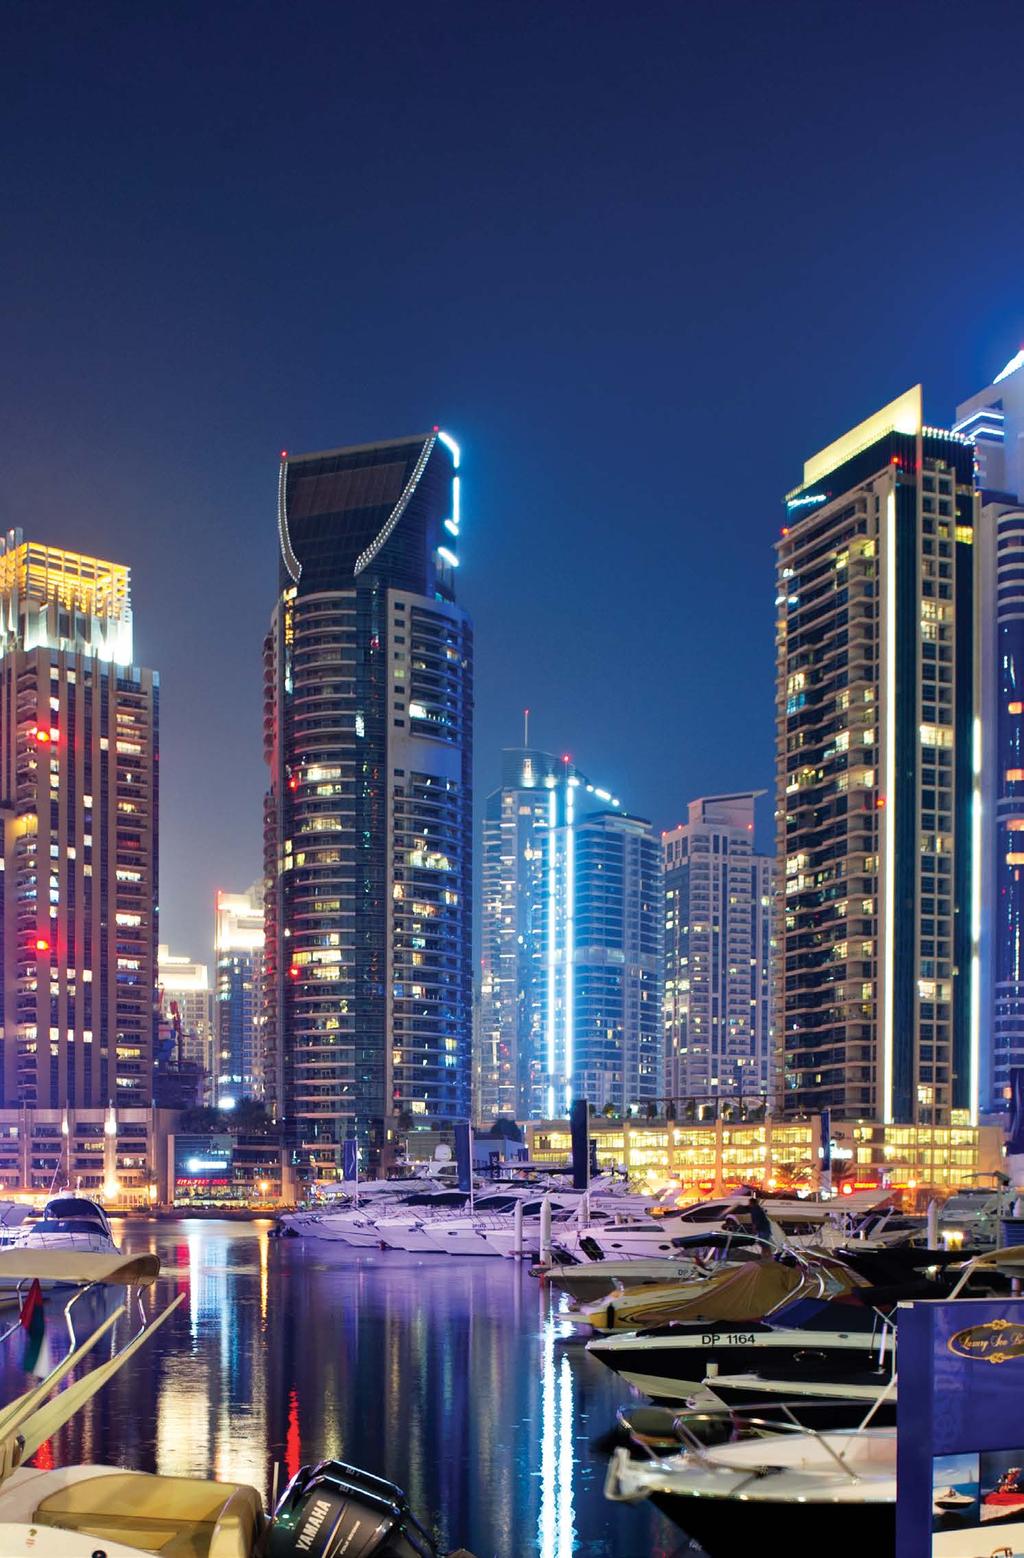 Envied by many, restricted to a few. This is the prized place to be. This is Dubai Marina.